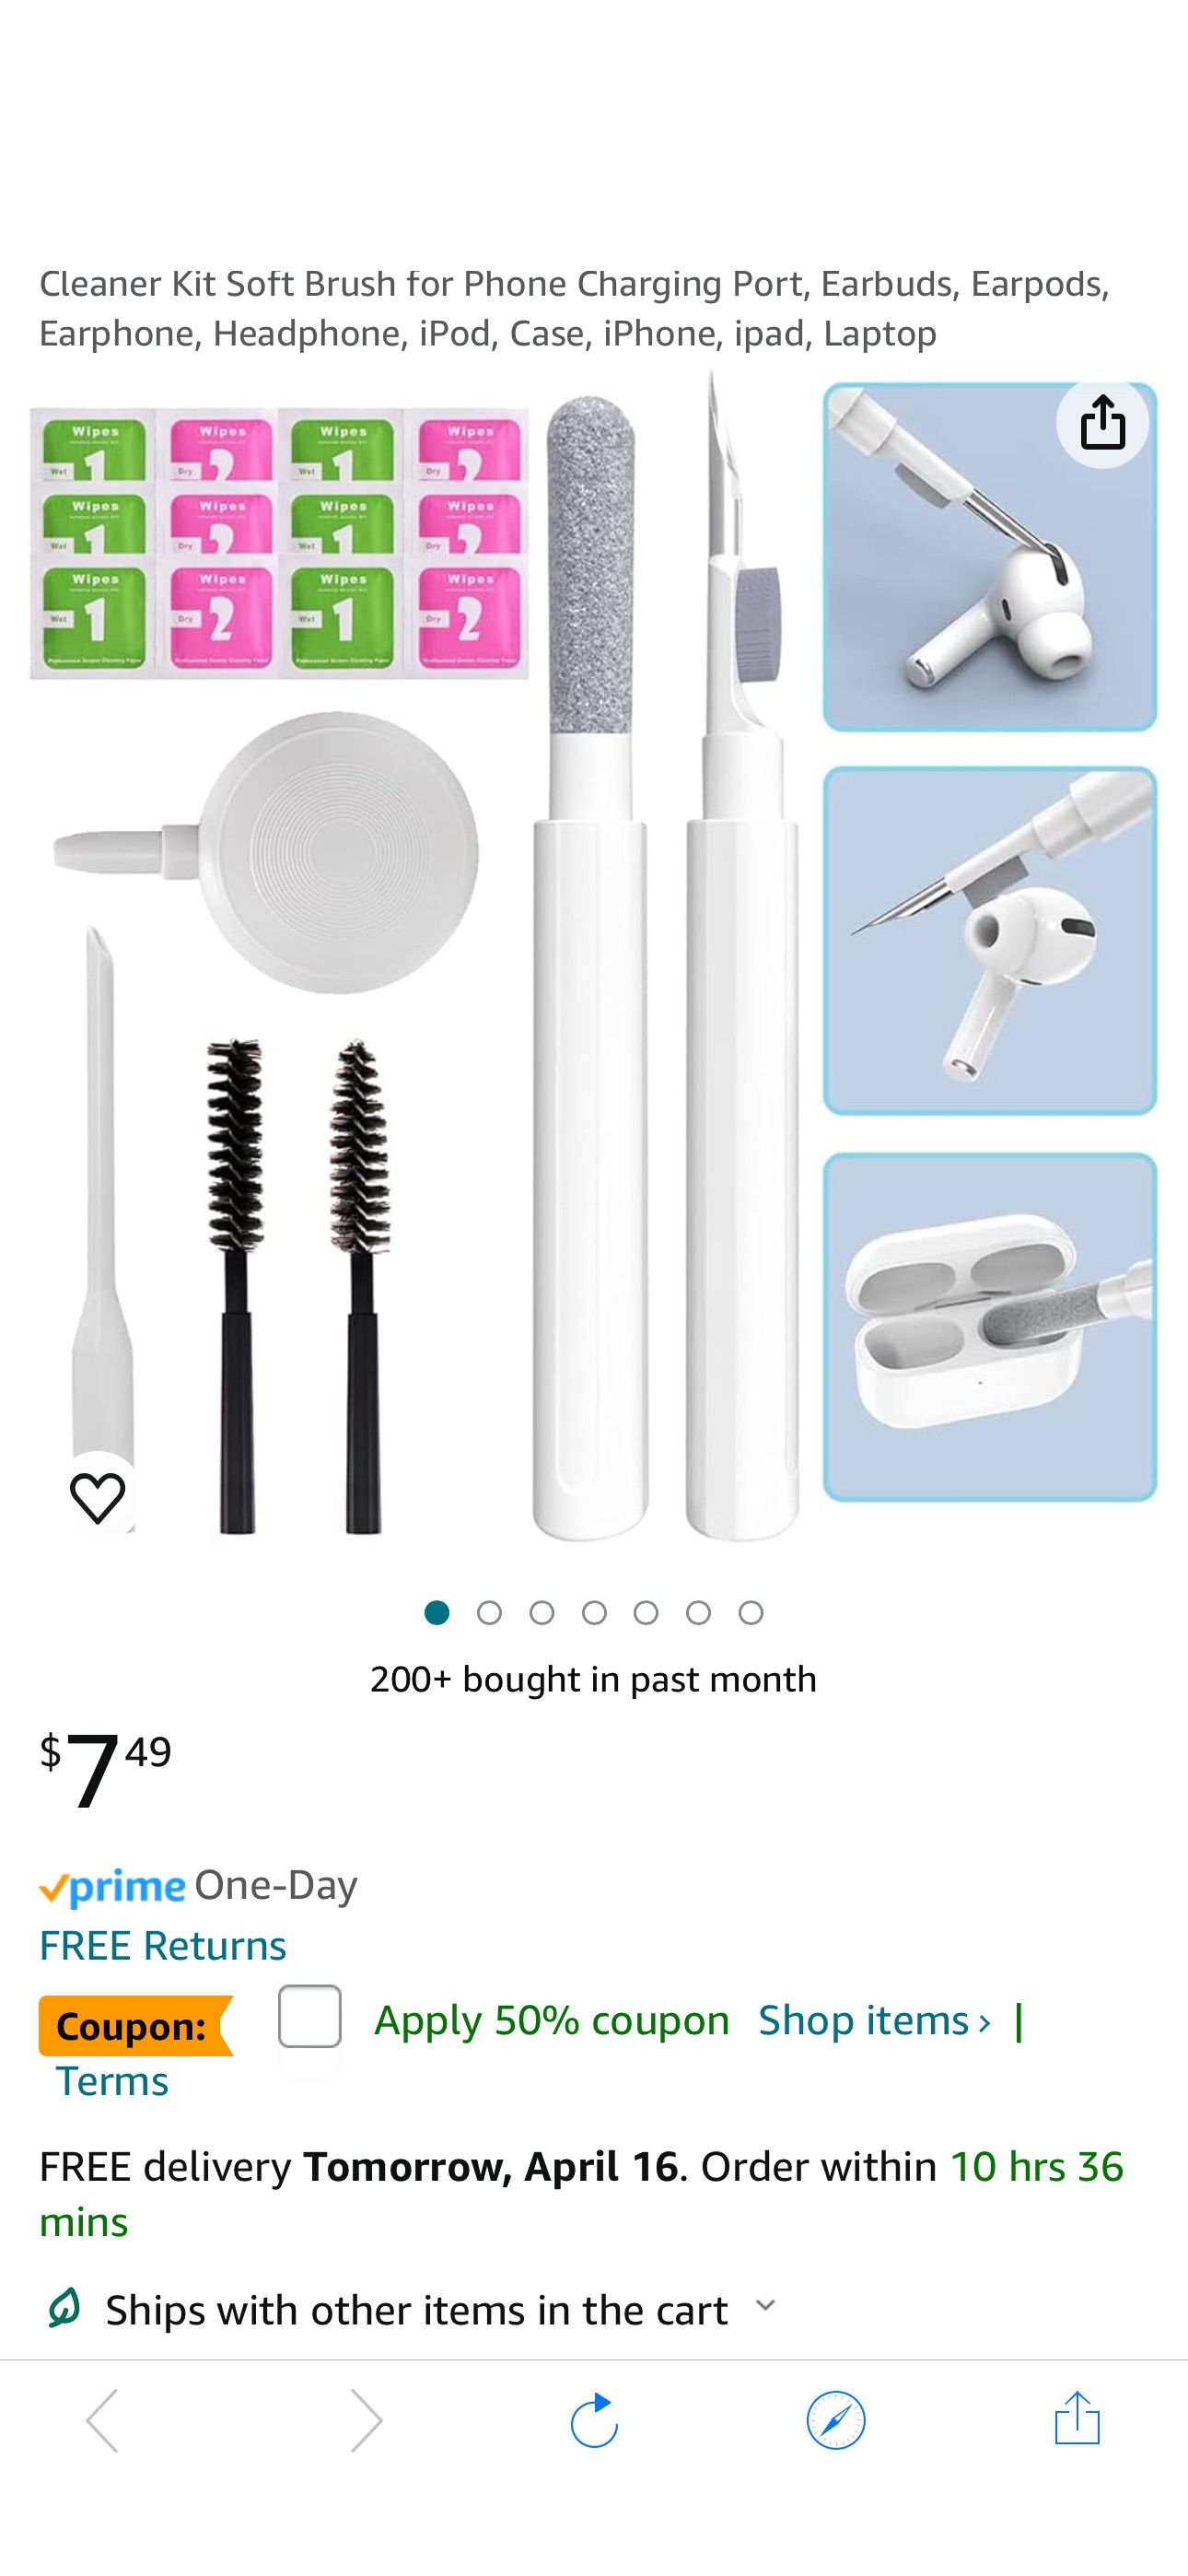 Amazon.com: Airpod Cleaner Kit, Airpods Pro Cleaning Pen, Multi-Function Cleaner Kit Soft Brush coupon